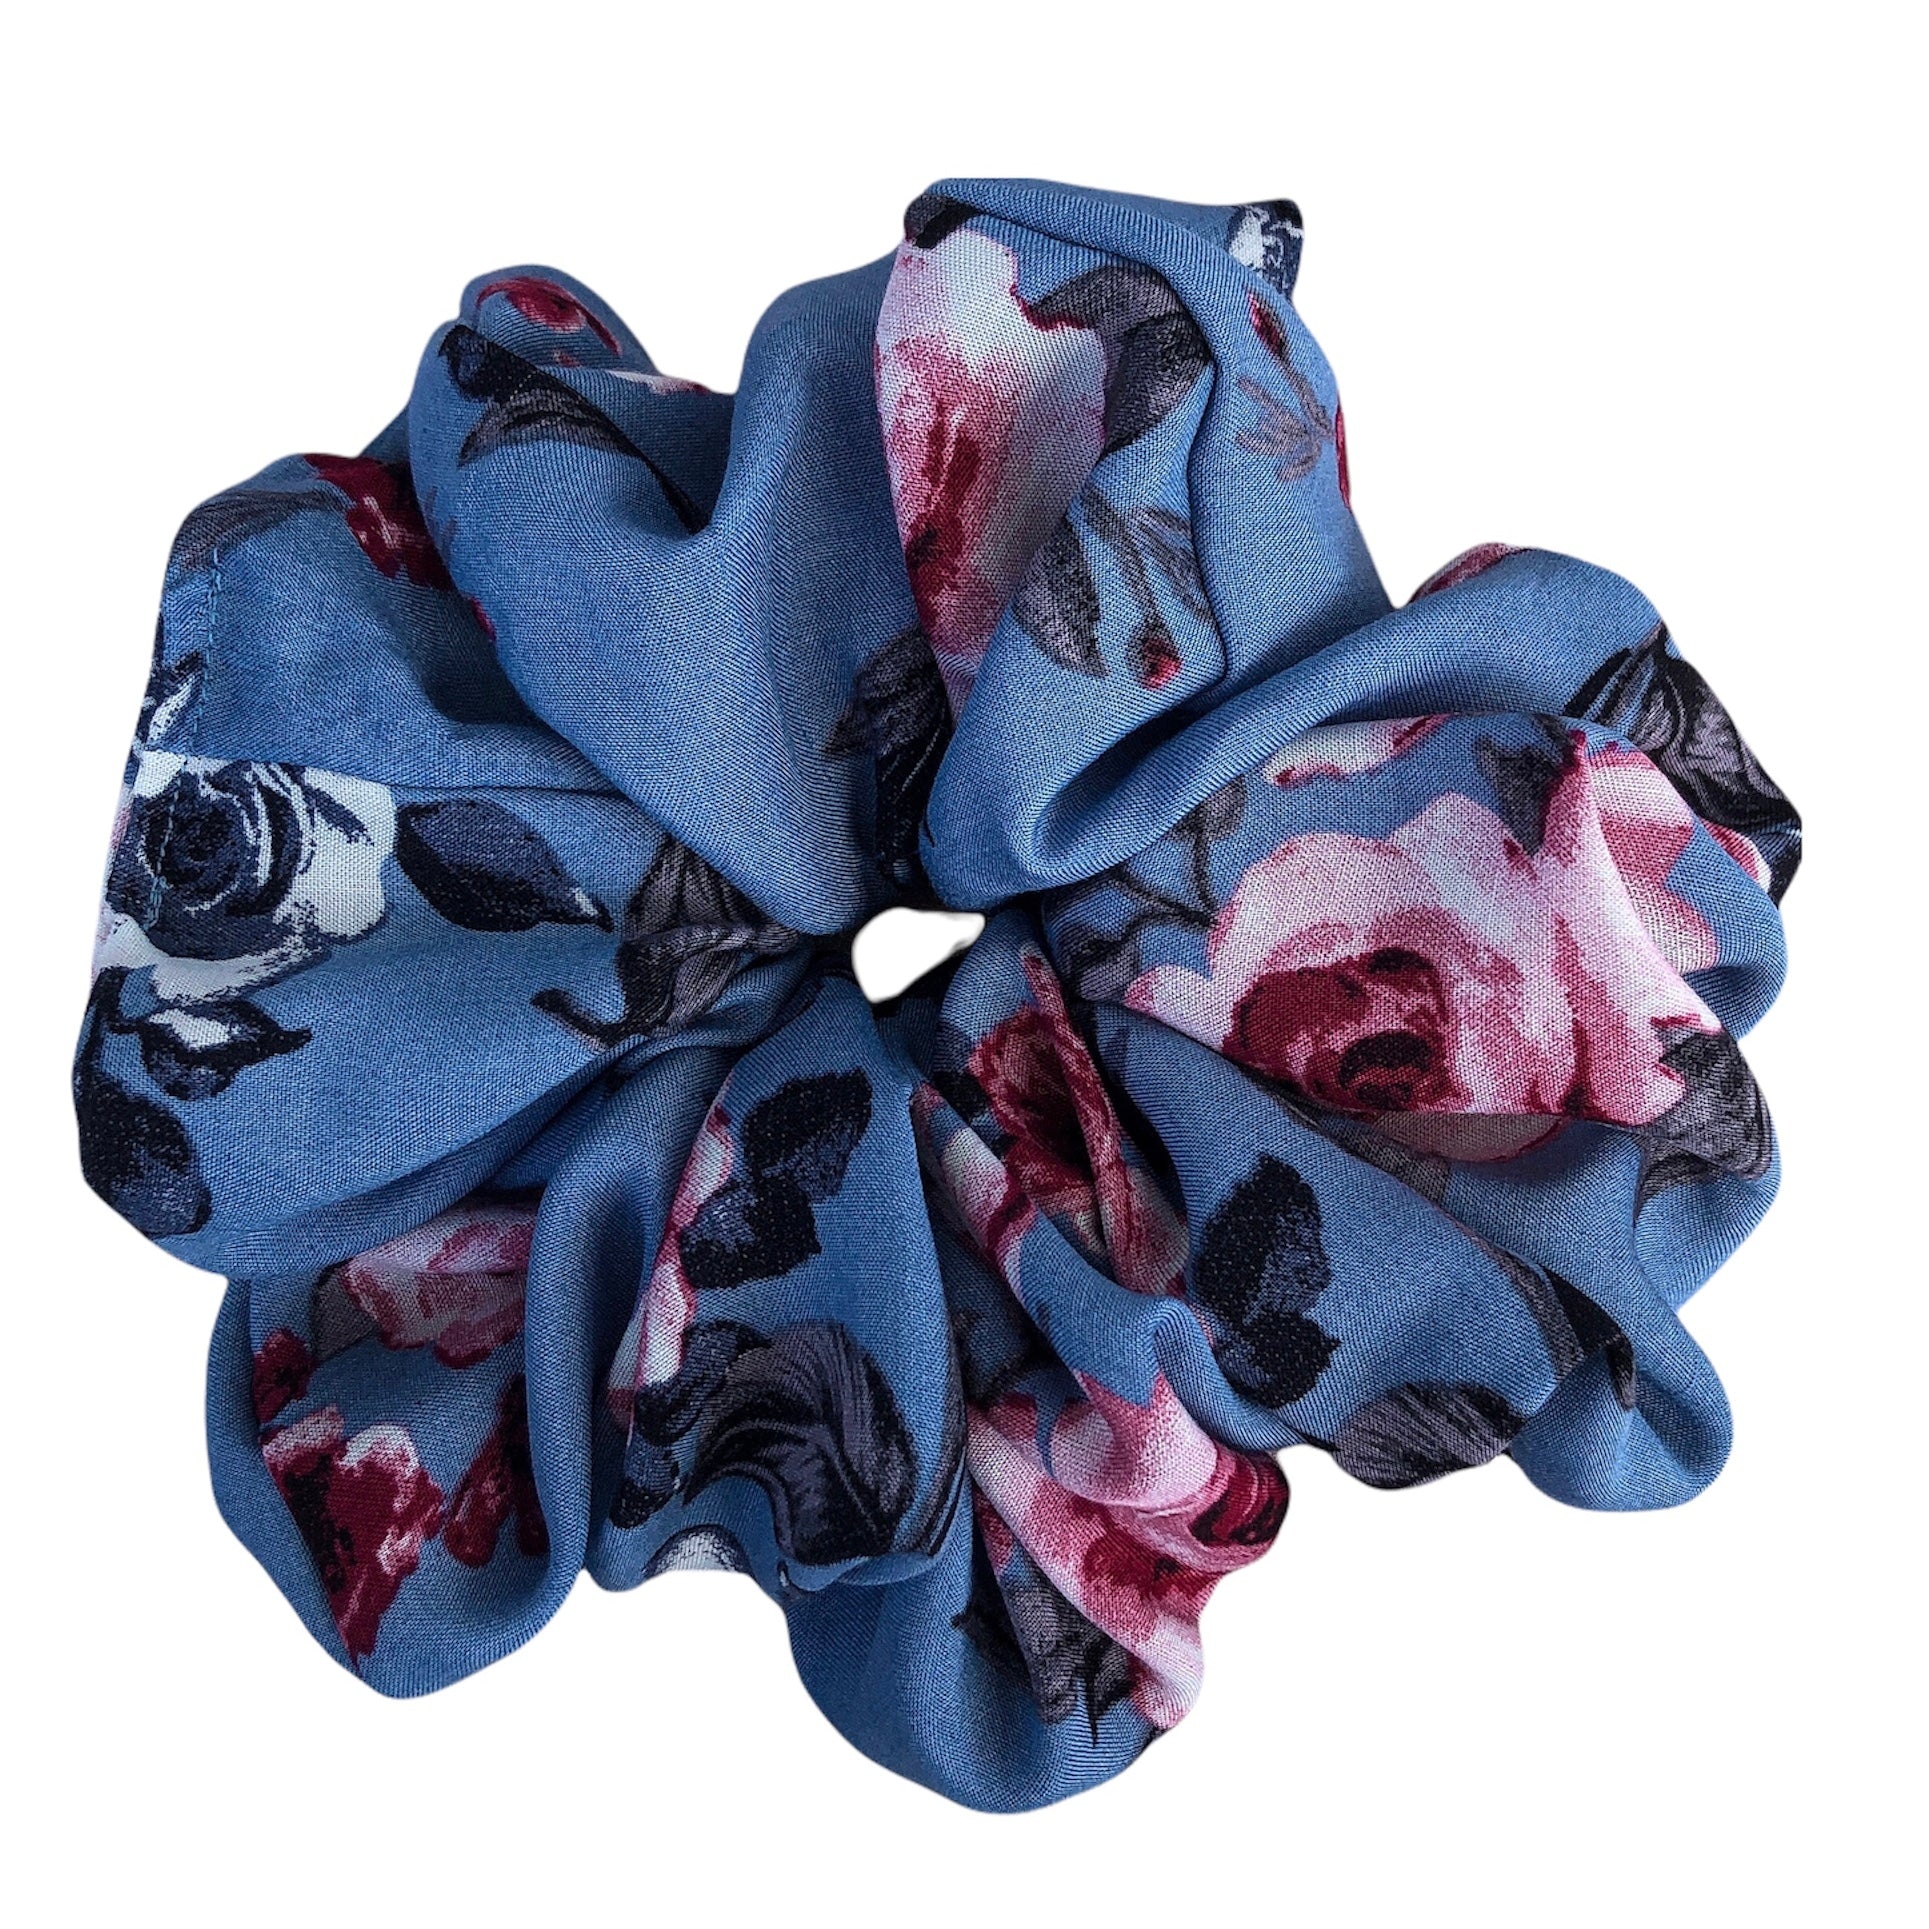 Oversized Florence Scrunchie. An XL, extra periwinkle blue rayon scrunchie with floral accents 